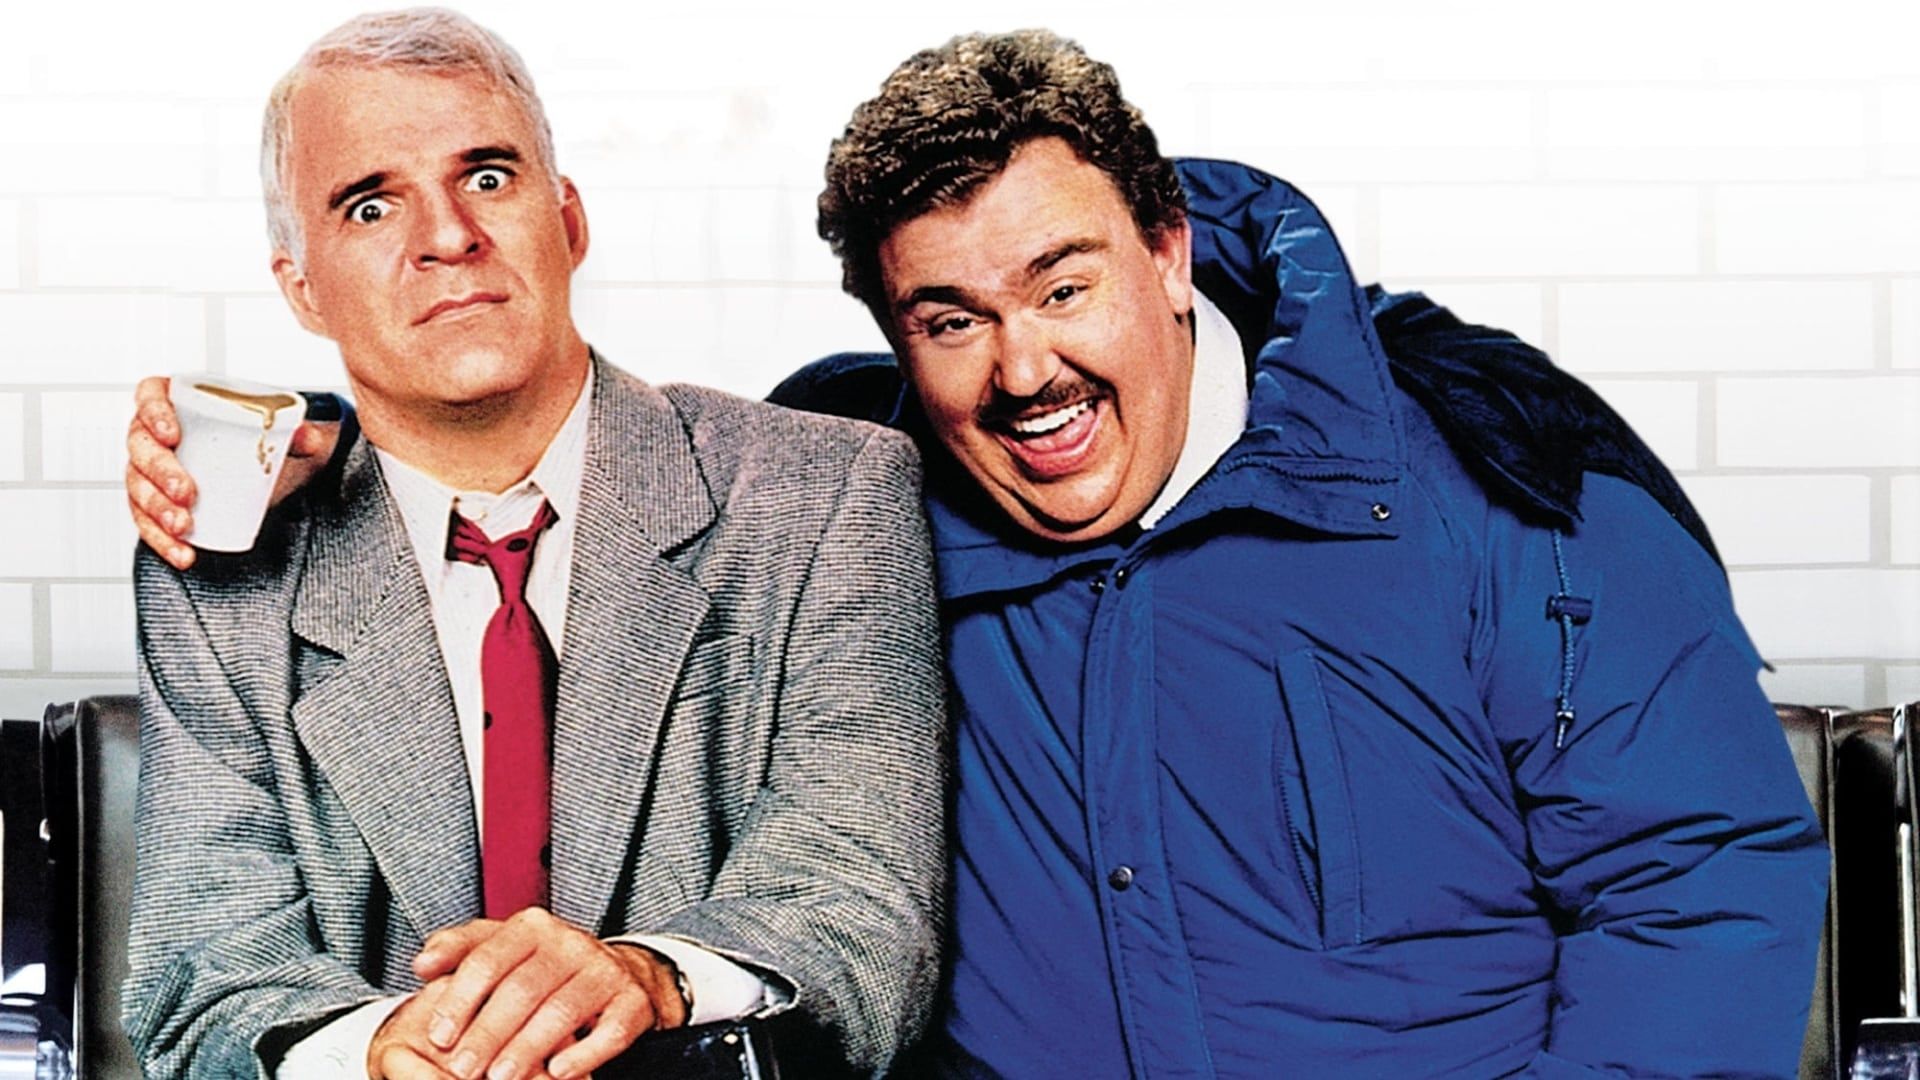 Poster of Planes, Trains, and Automobiles